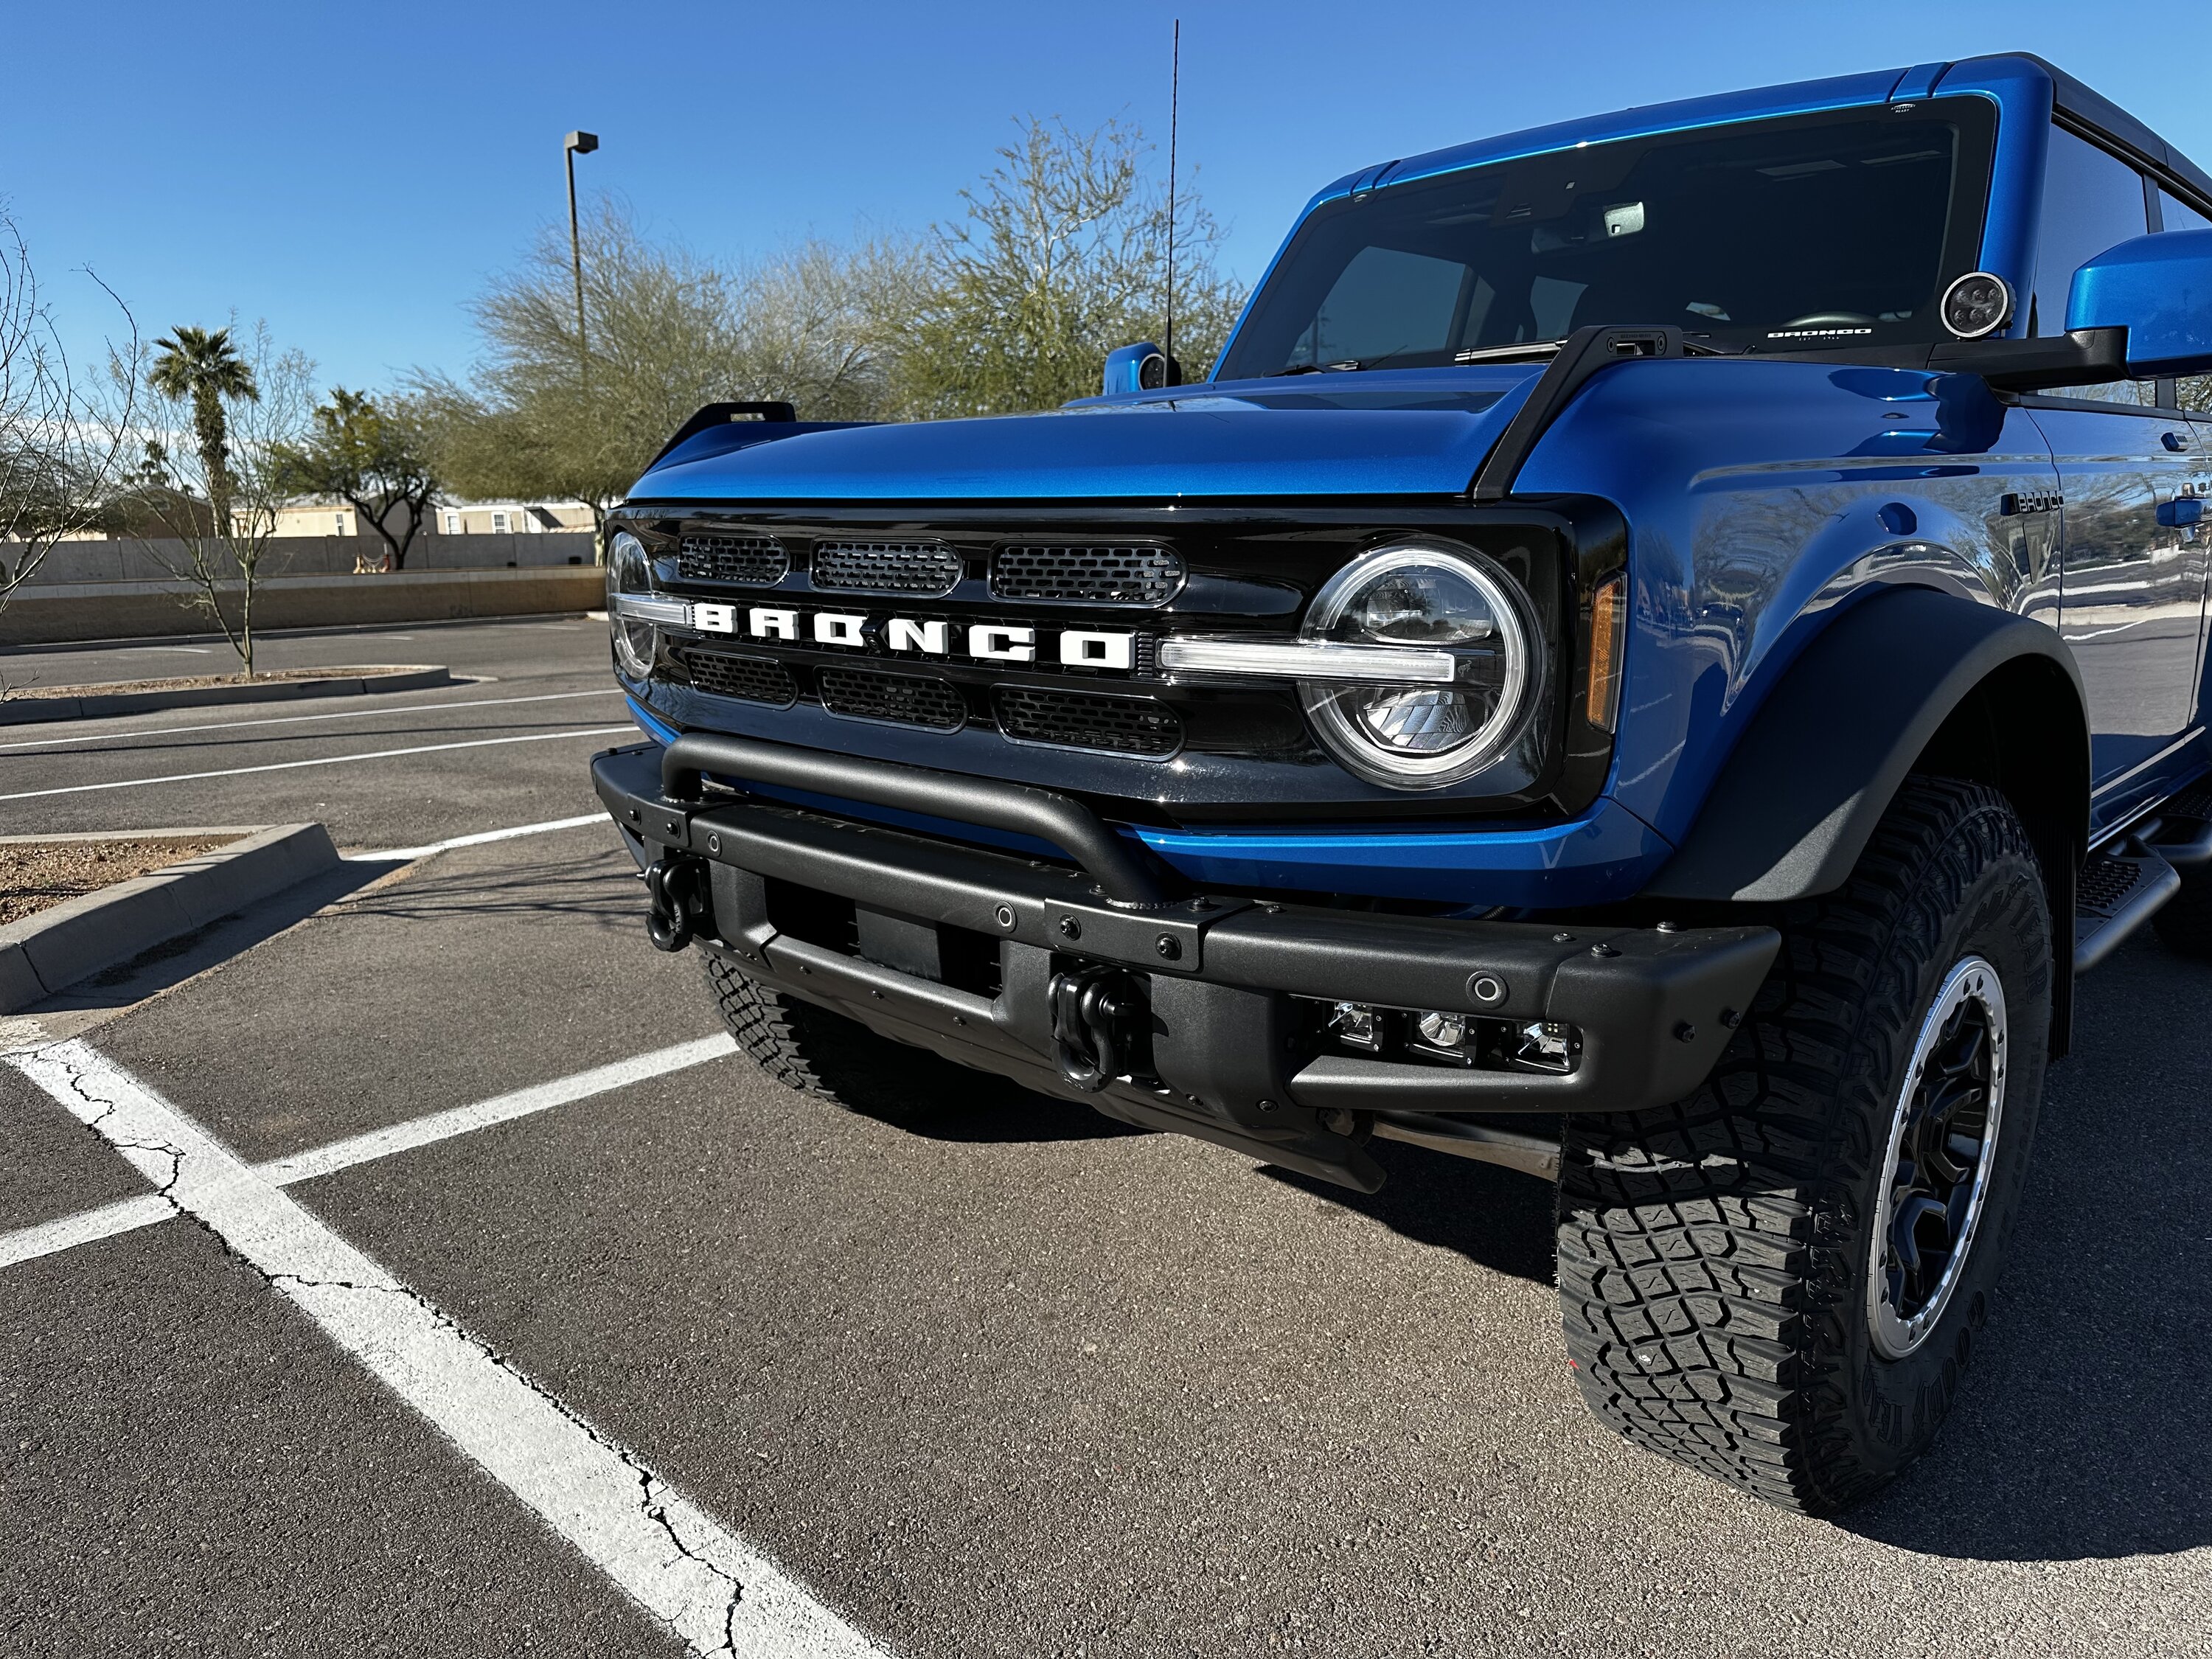 Ford Bronco Mesh grill inserts installed on Big Bend 4222557A-FA79-49F0-8F8E-C7A388D2FEED